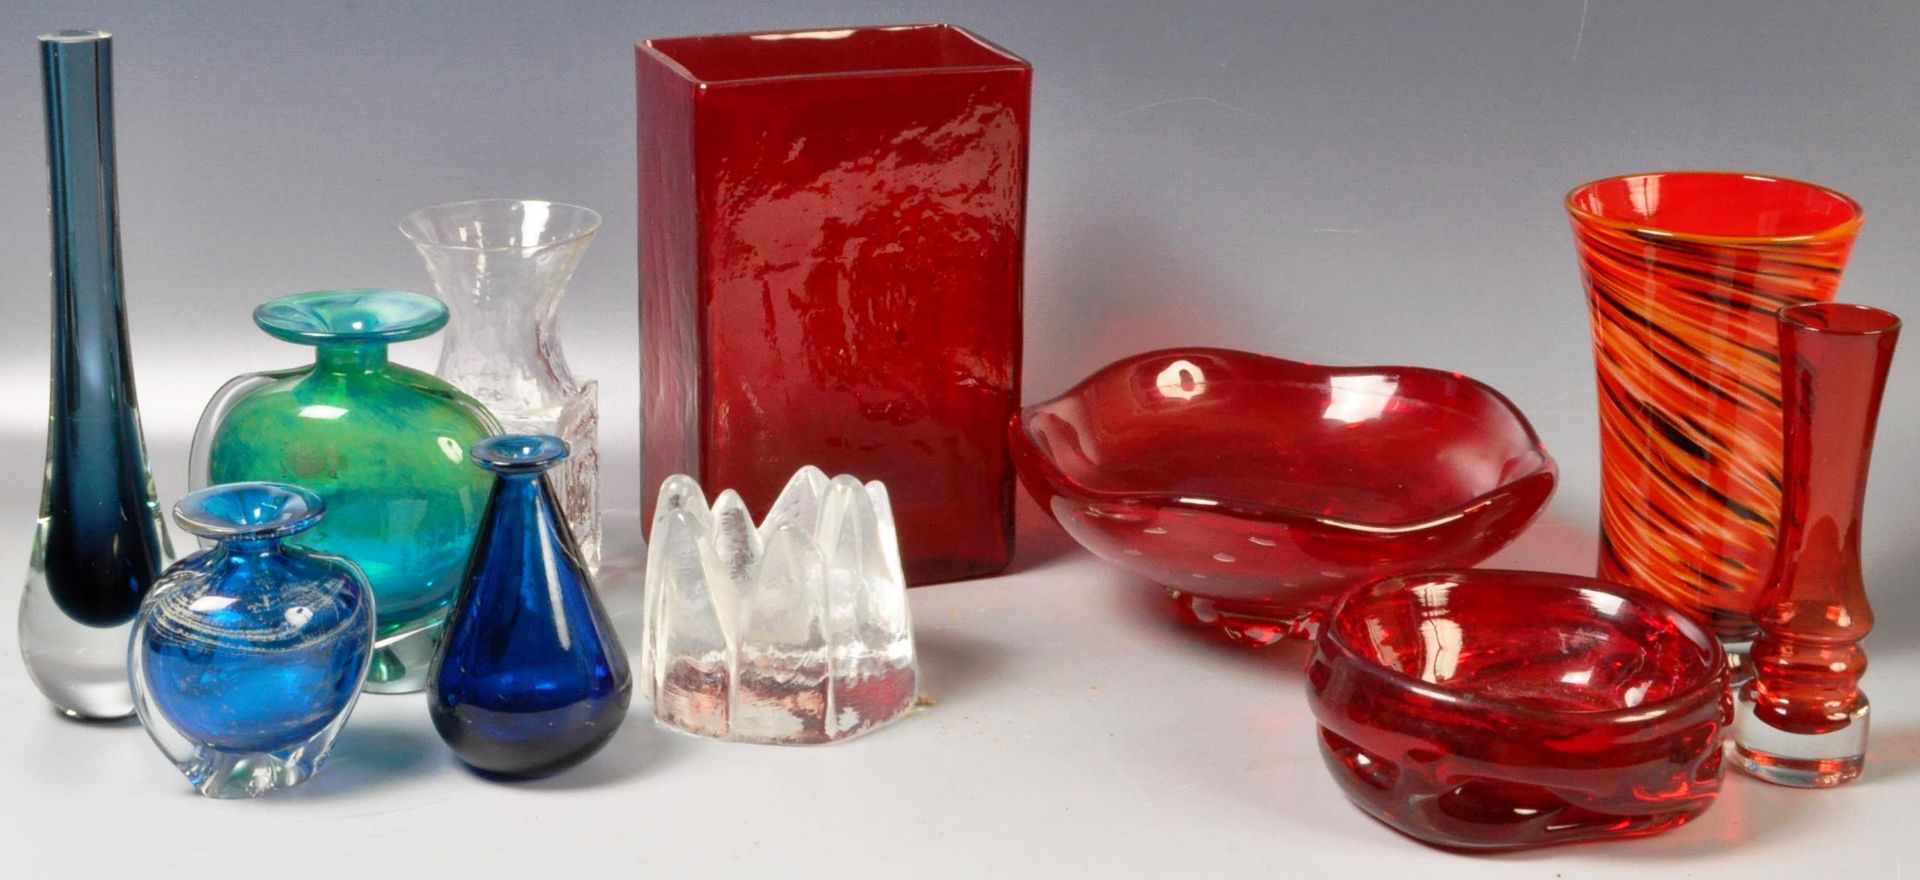 MIXED COLLECTION OF STUDIO ART GLASS VASE INCLUDING MEDINA